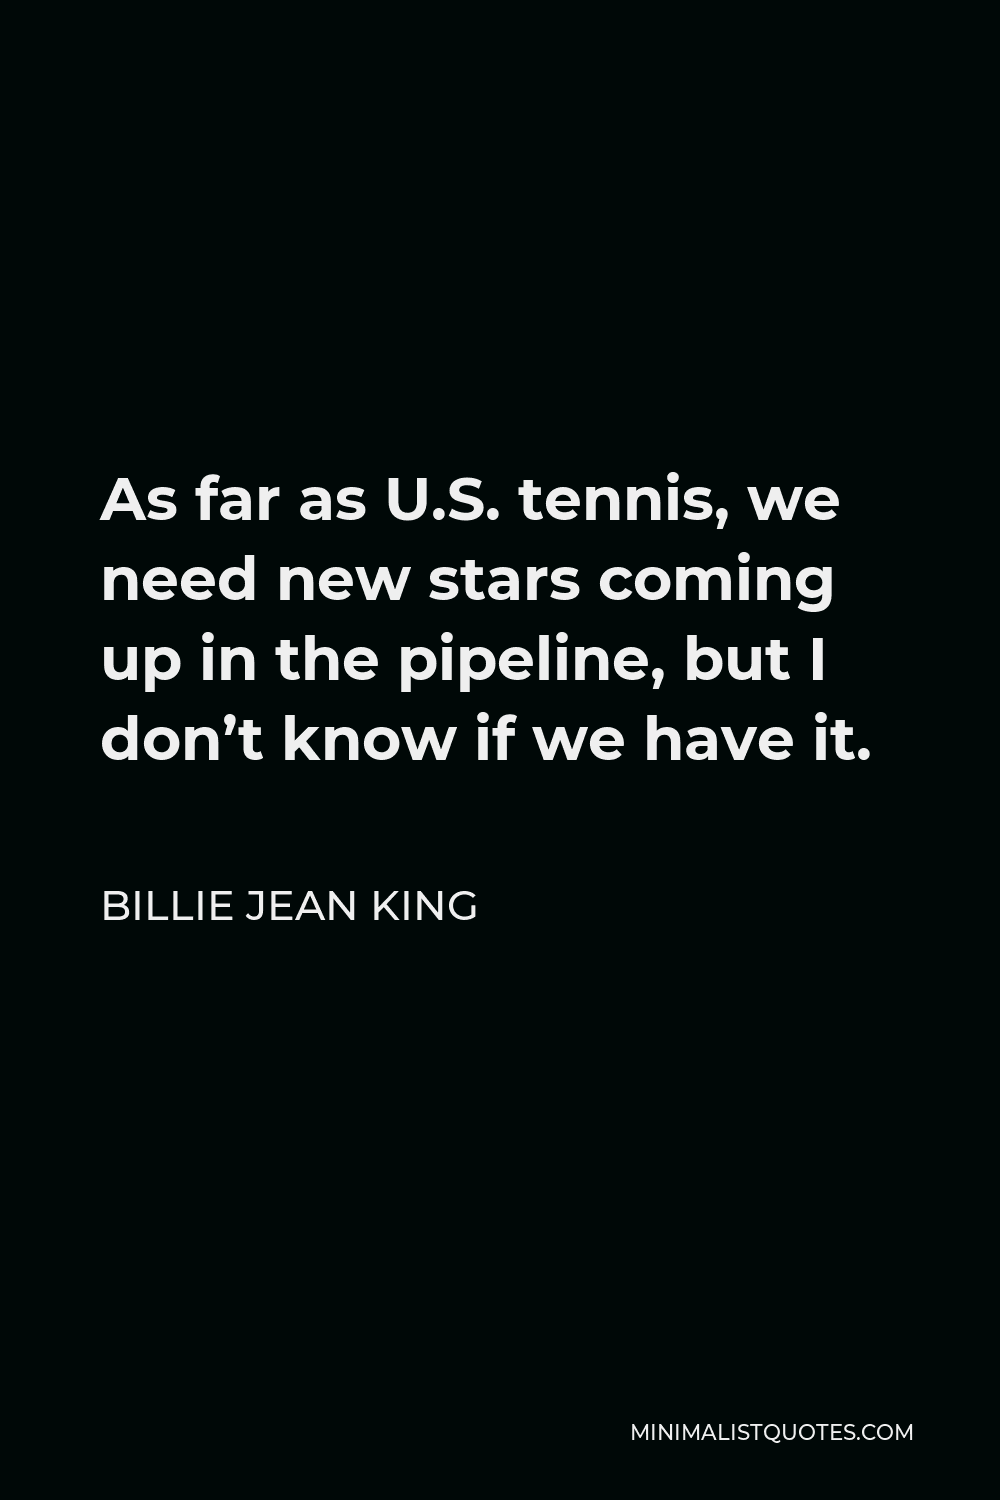 Billie Jean King Quote - As far as U.S. tennis, we need new stars coming up in the pipeline, but I don’t know if we have it.